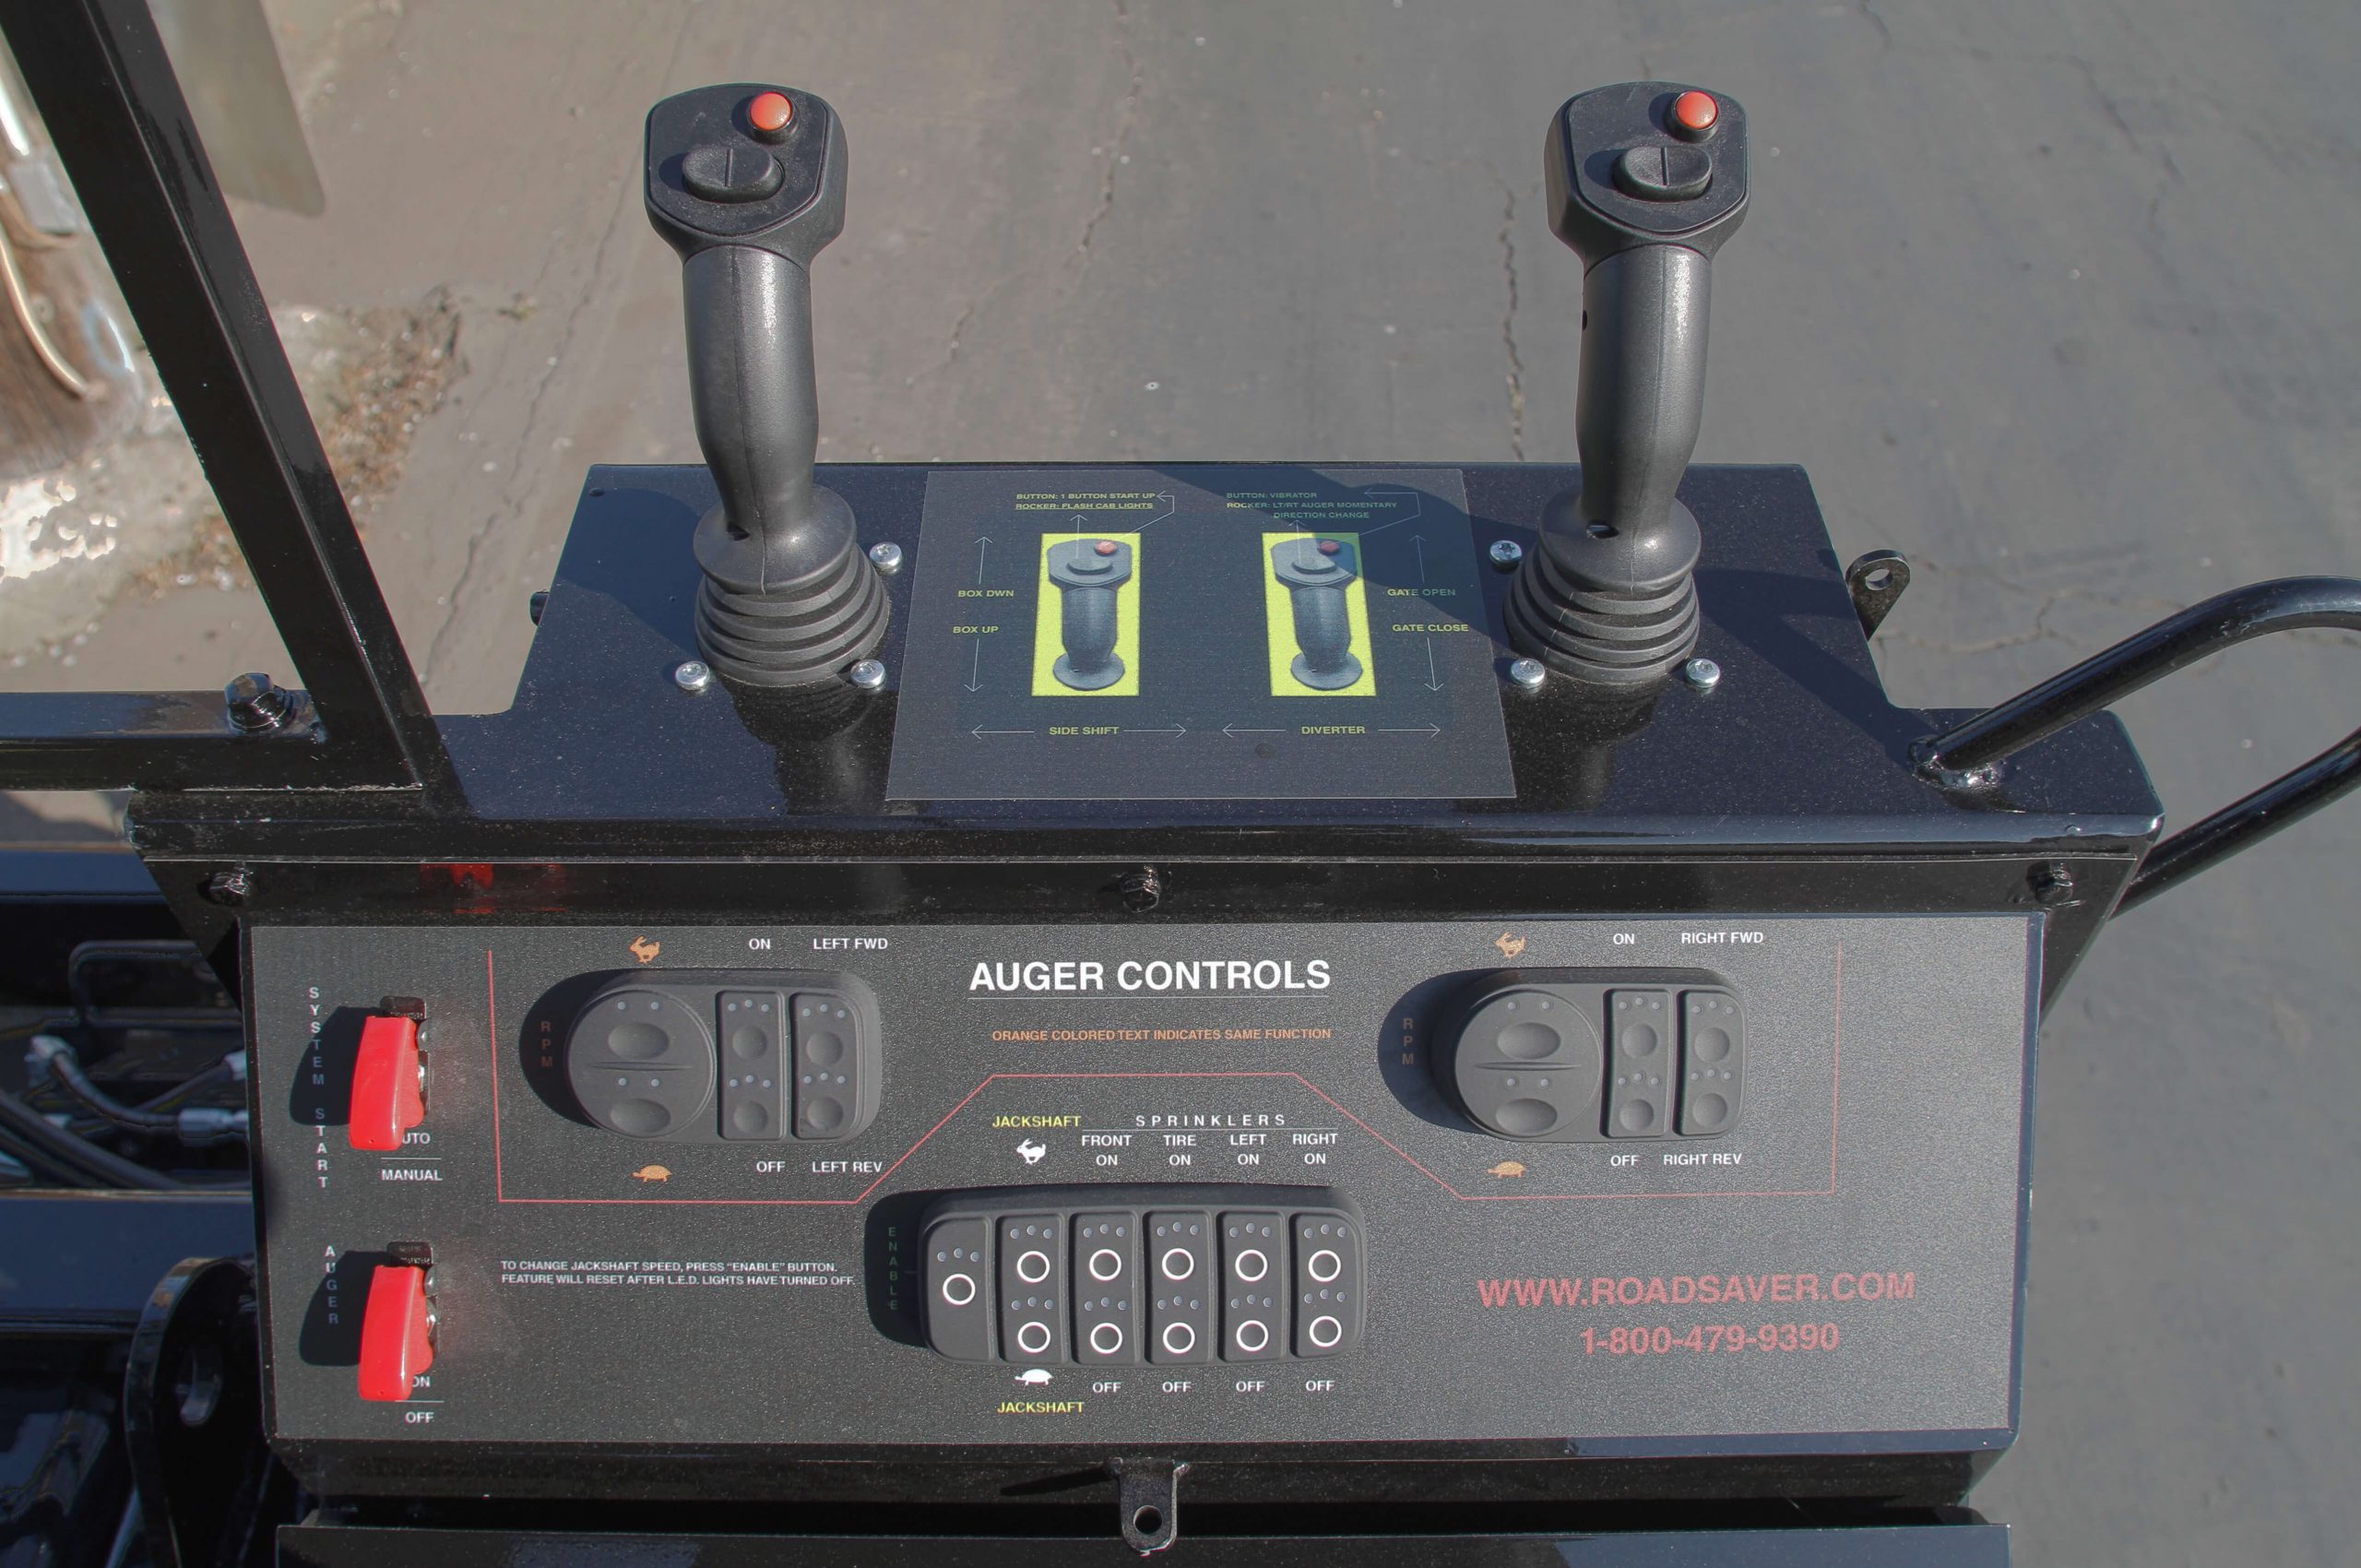 The RoadSaver's Operator Control System